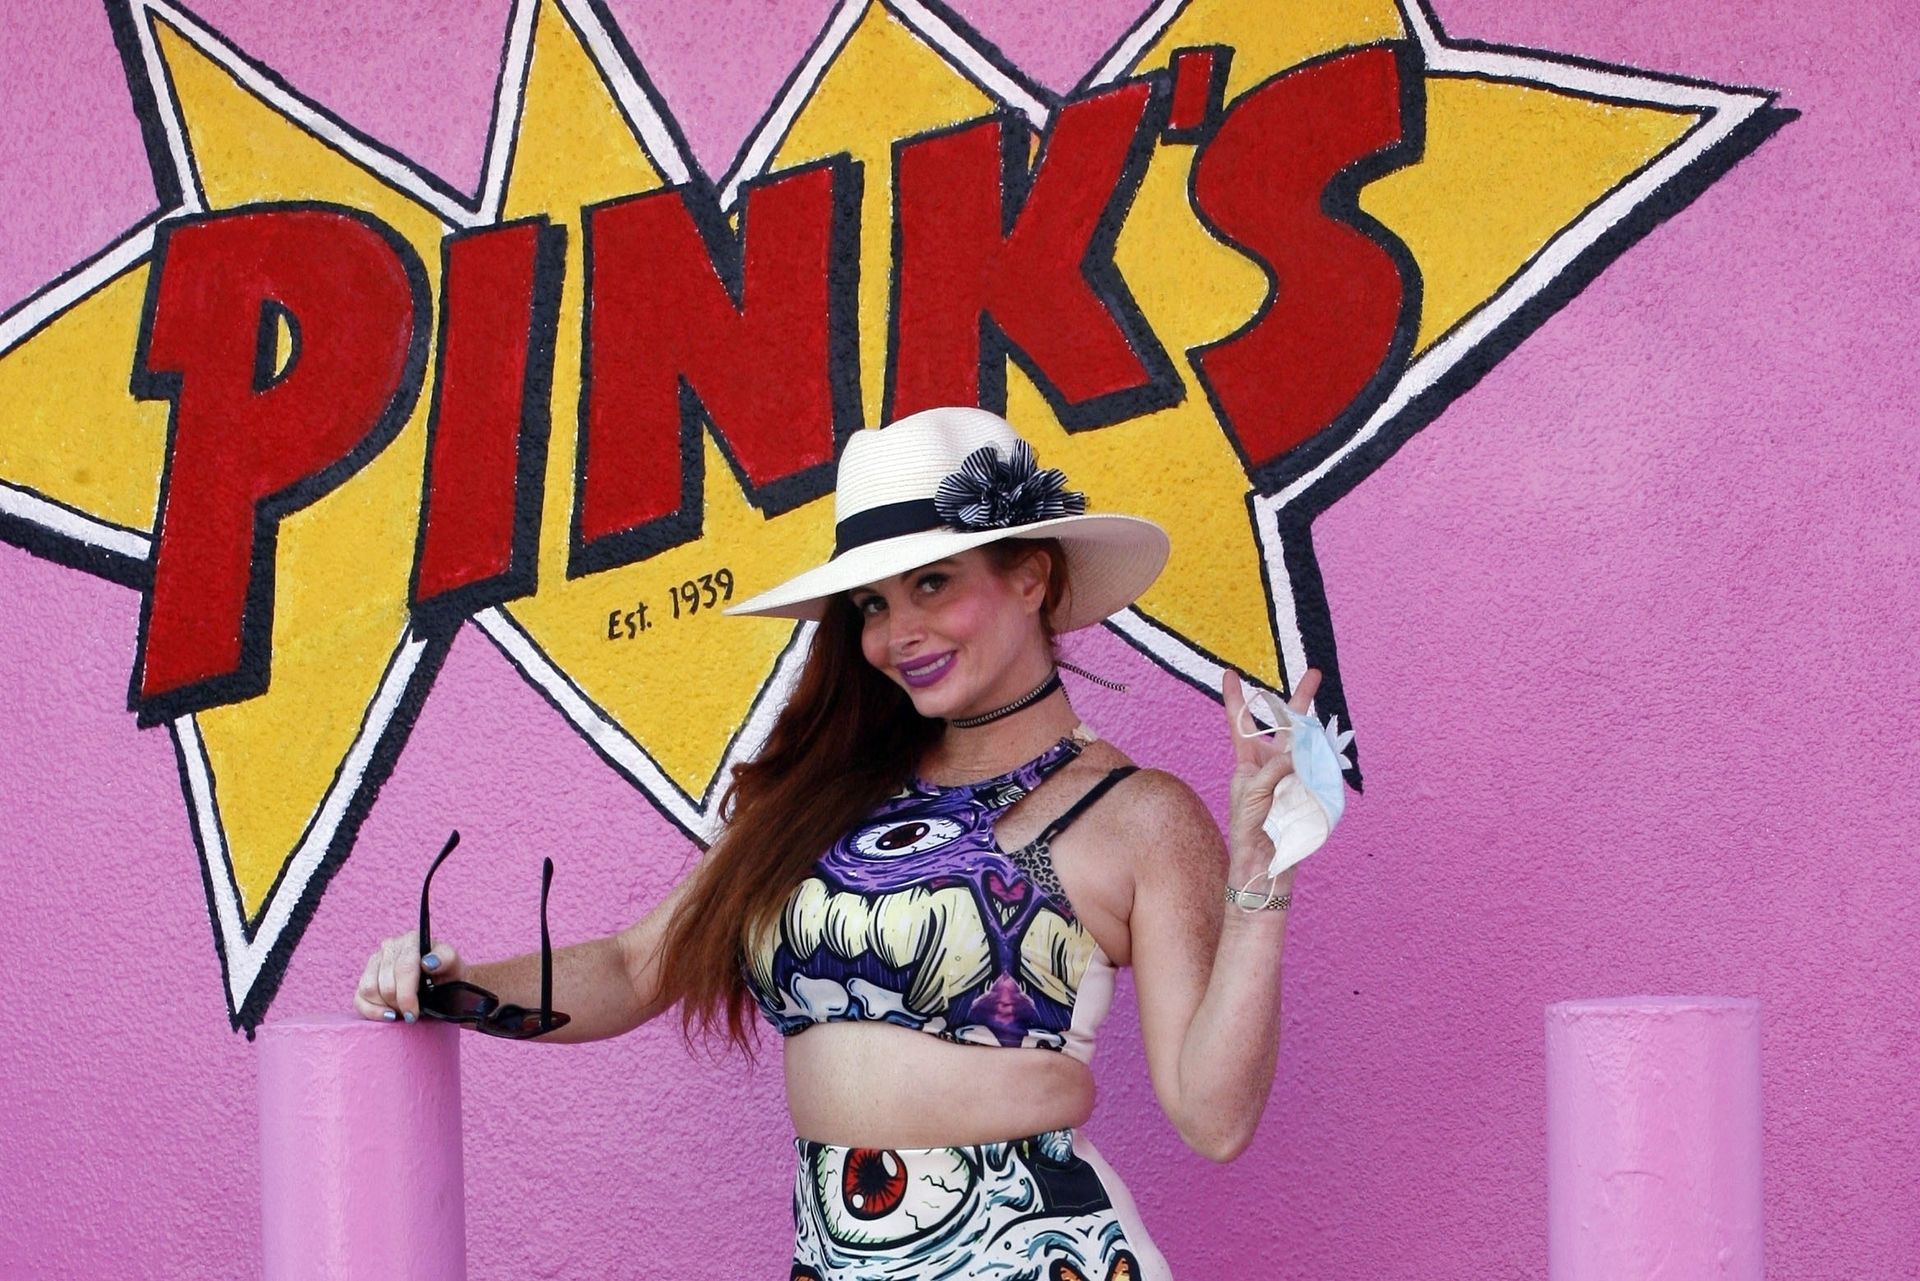 Phoebe Price Grabs a Snack at Pink’s Hot Dogs (66 Photos)